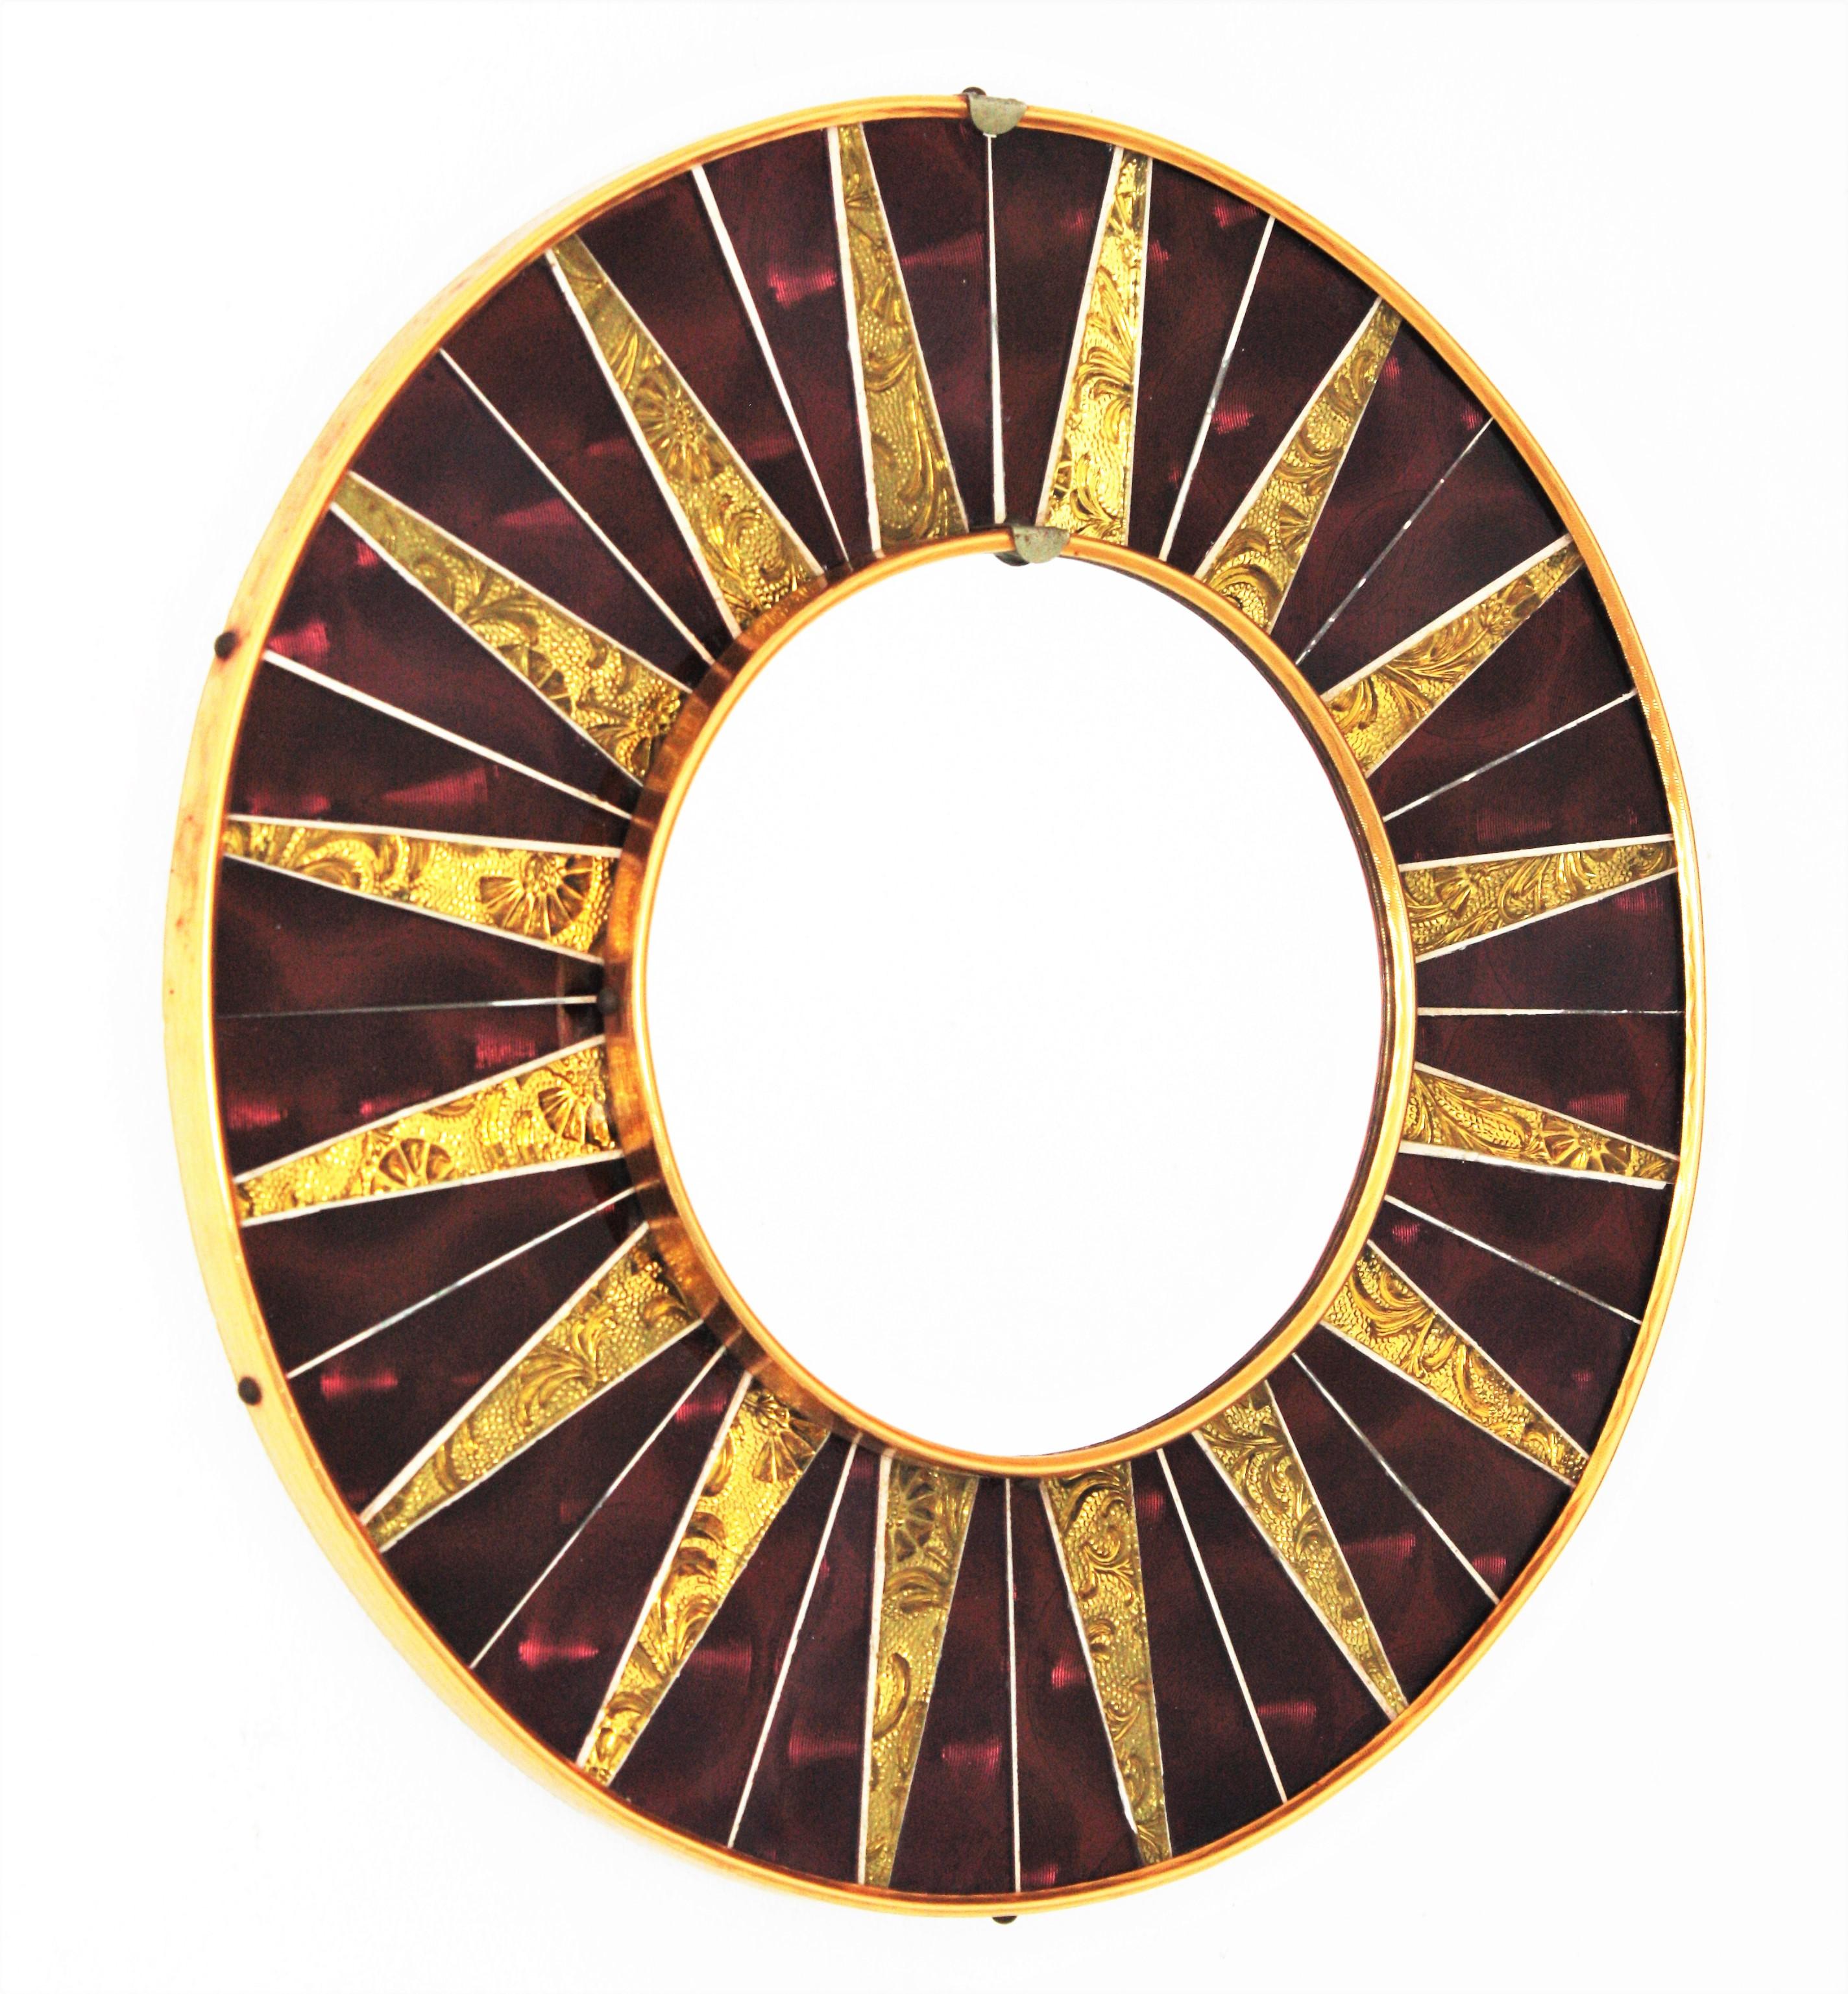 An stylish Mid-Century Modern round mirror with garnet and golden glass mosaic frame, Spain, circa 1960s.
The frame is comprised by a background made of burgundy / garnet textured glass pieces and golden mirrored glass pieces as leaves creating a